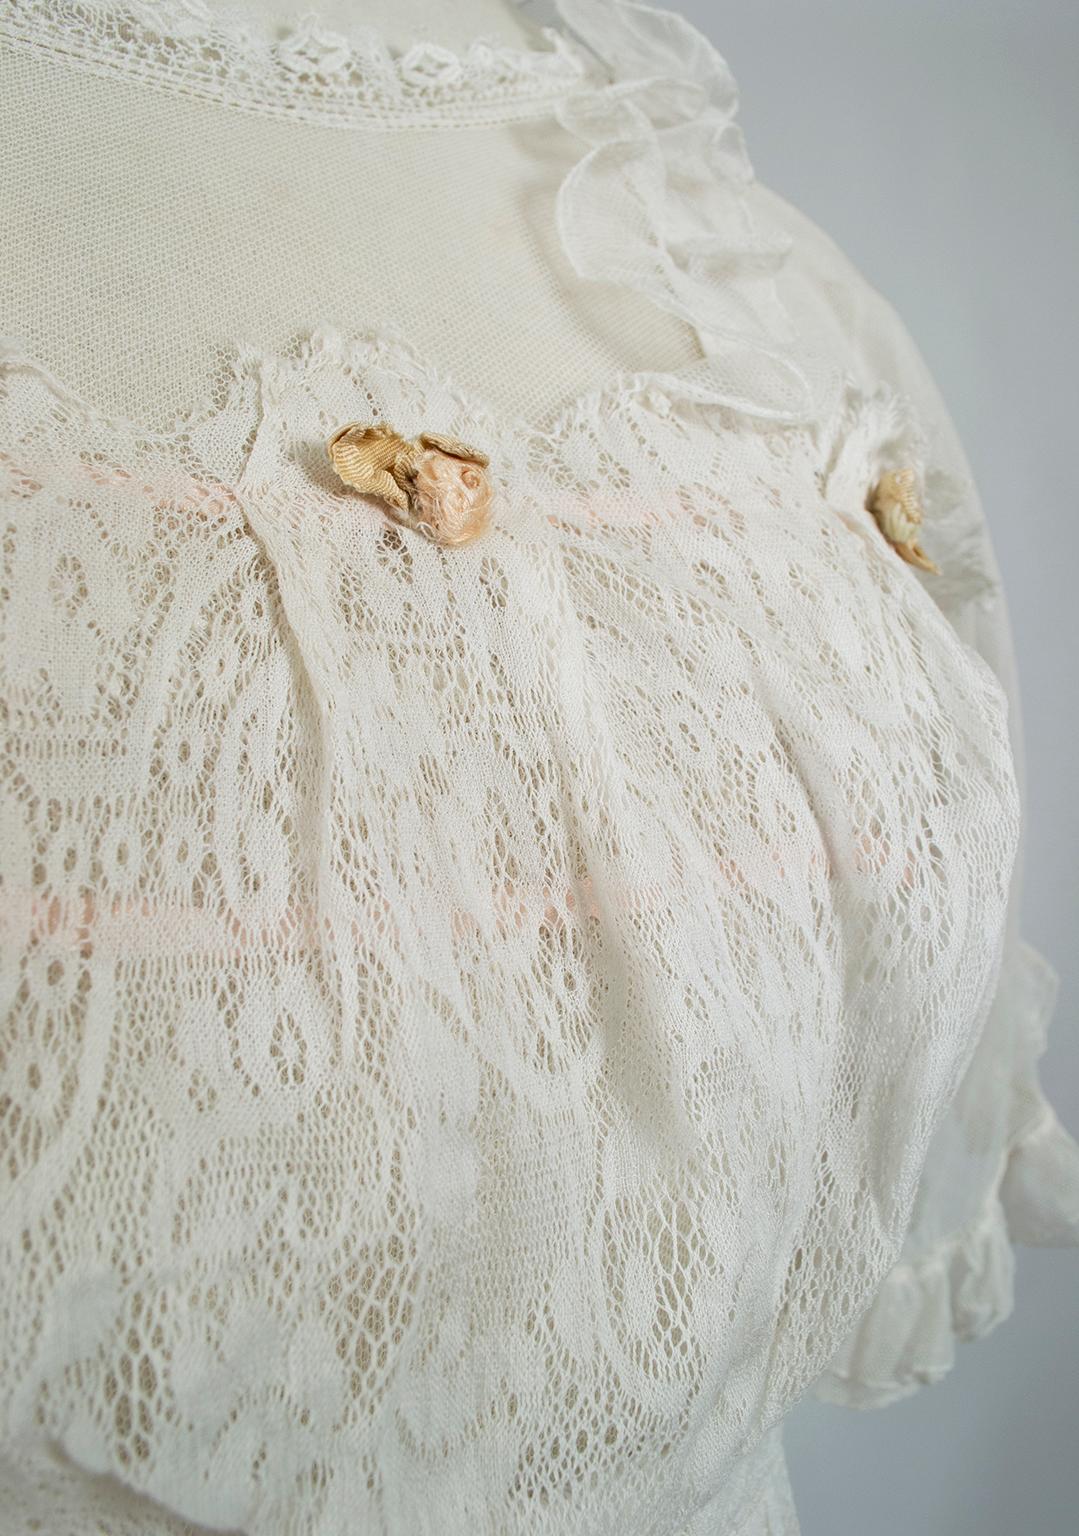 White Edwardian Net Rosebud Afternoon Tea or Bridal Gown - XXS, Early 1900s For Sale 3